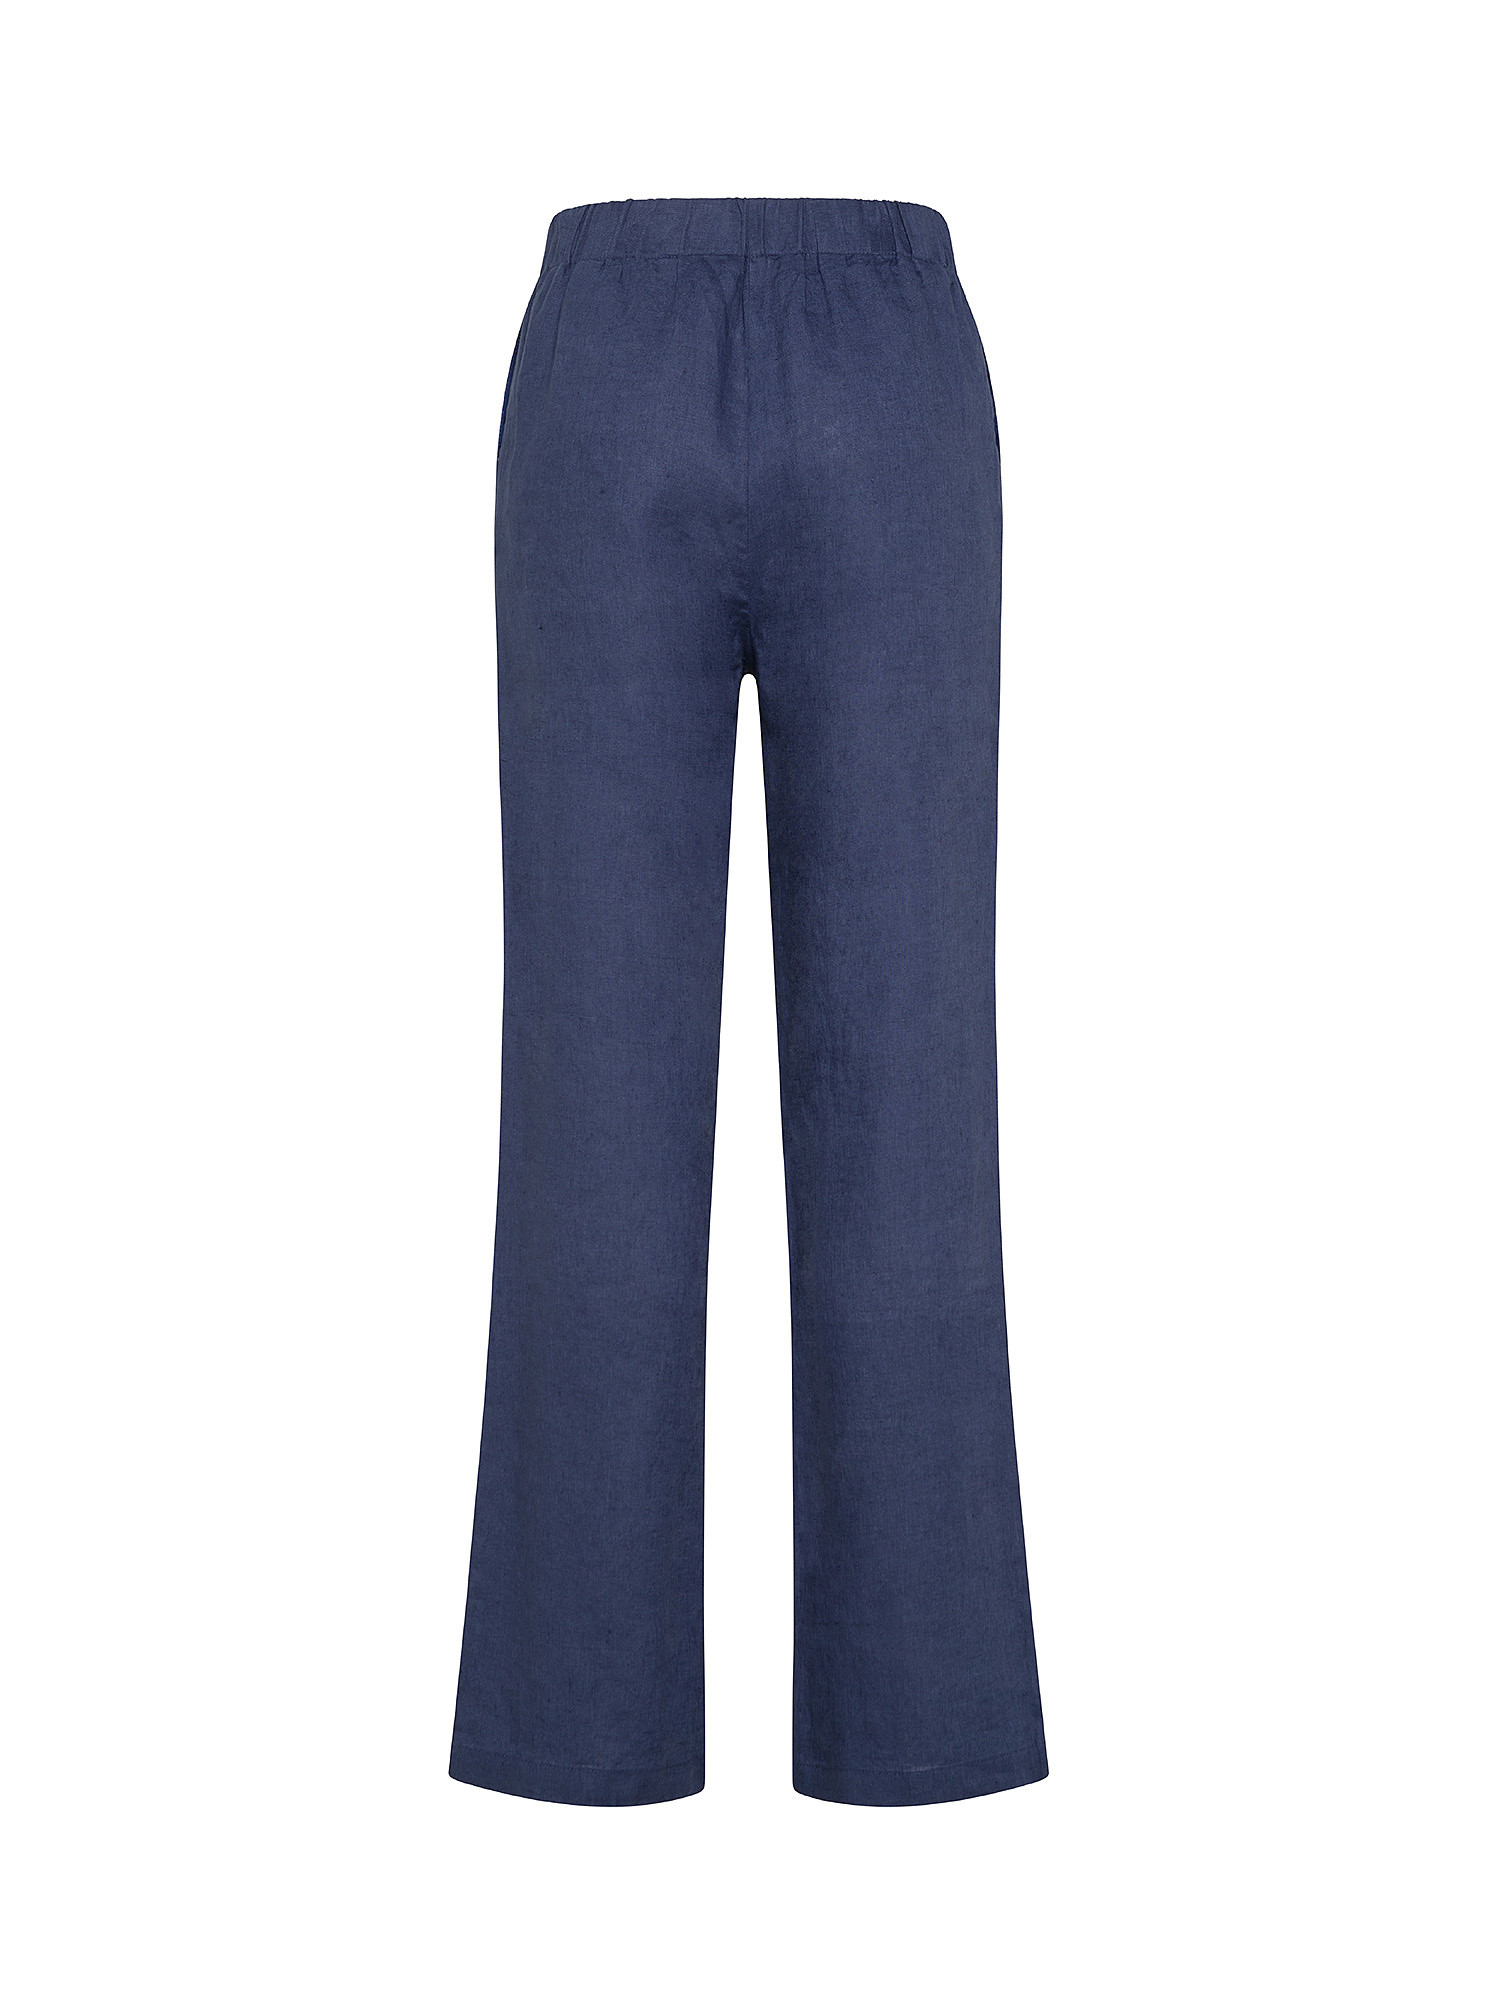 Koan - Straight linen trousers, Blue, large image number 1